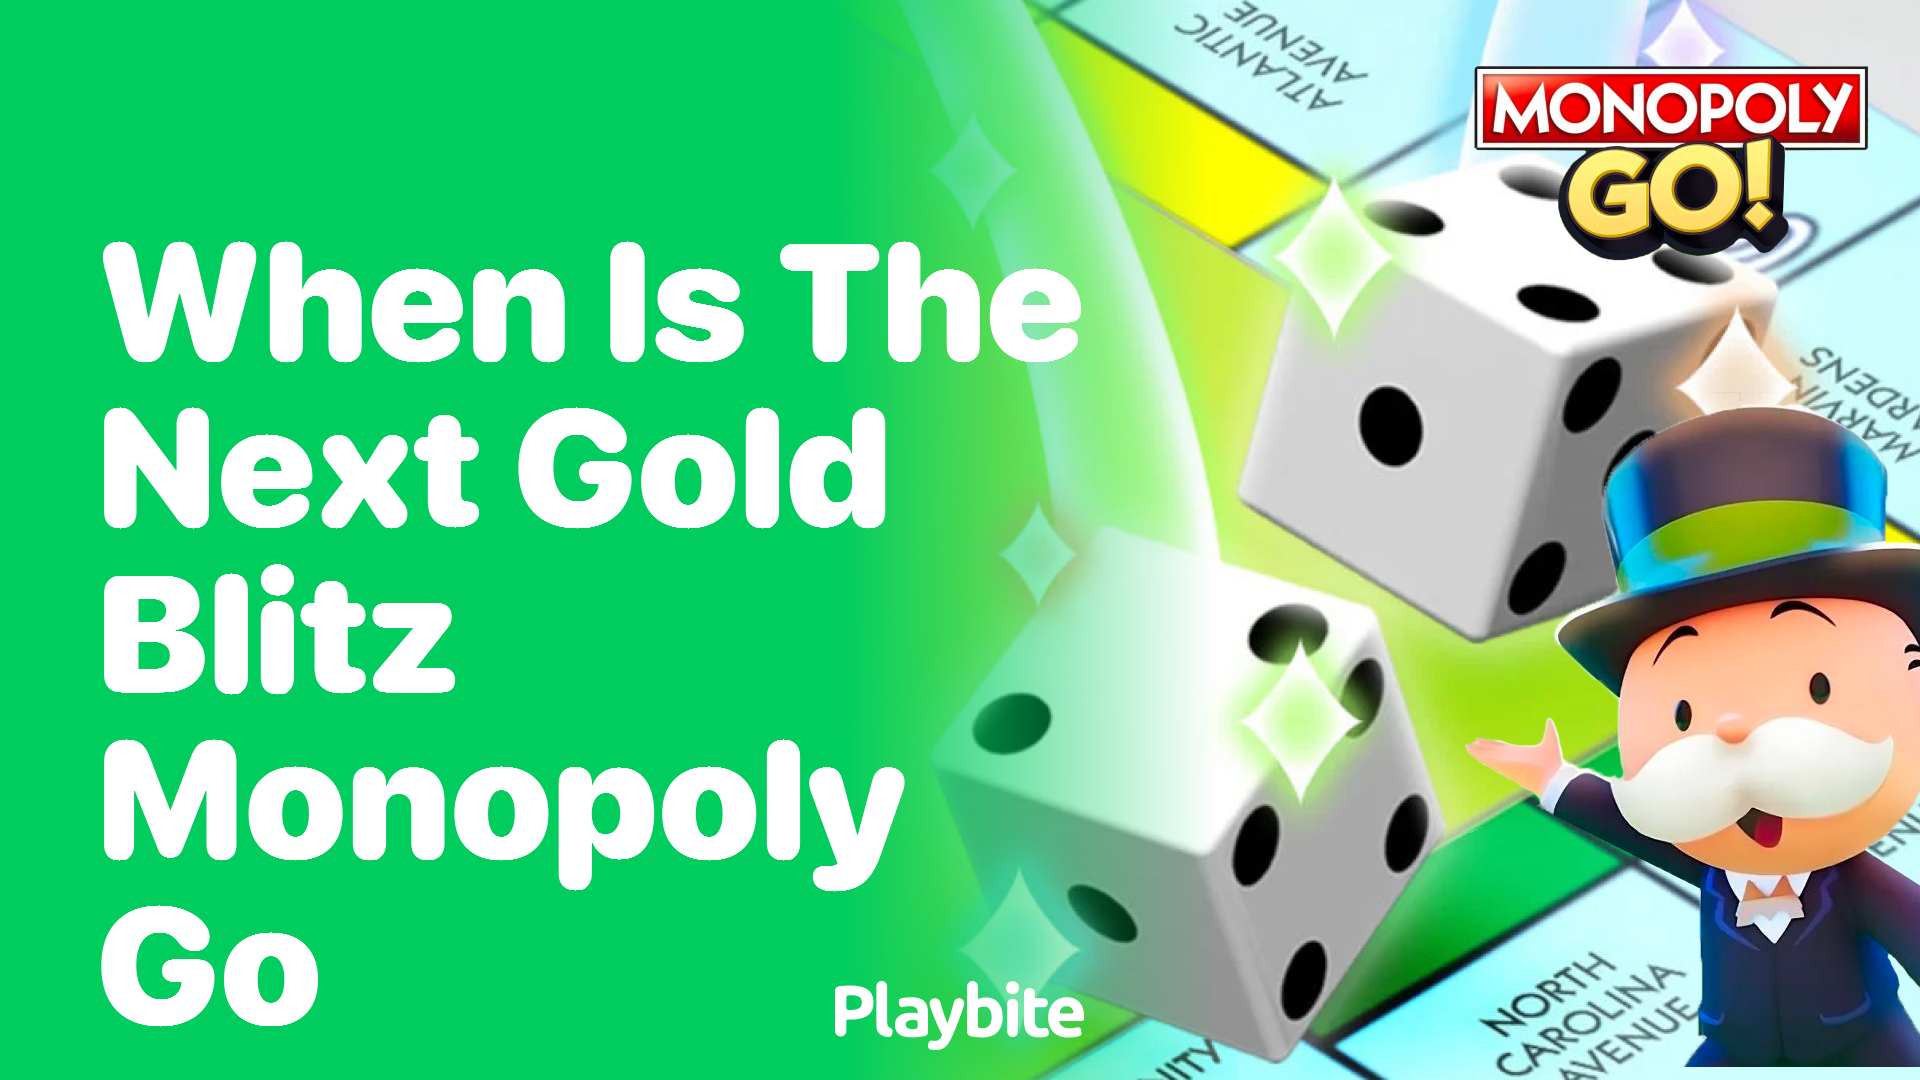 When Is the Next Gold Blitz in Monopoly Go?